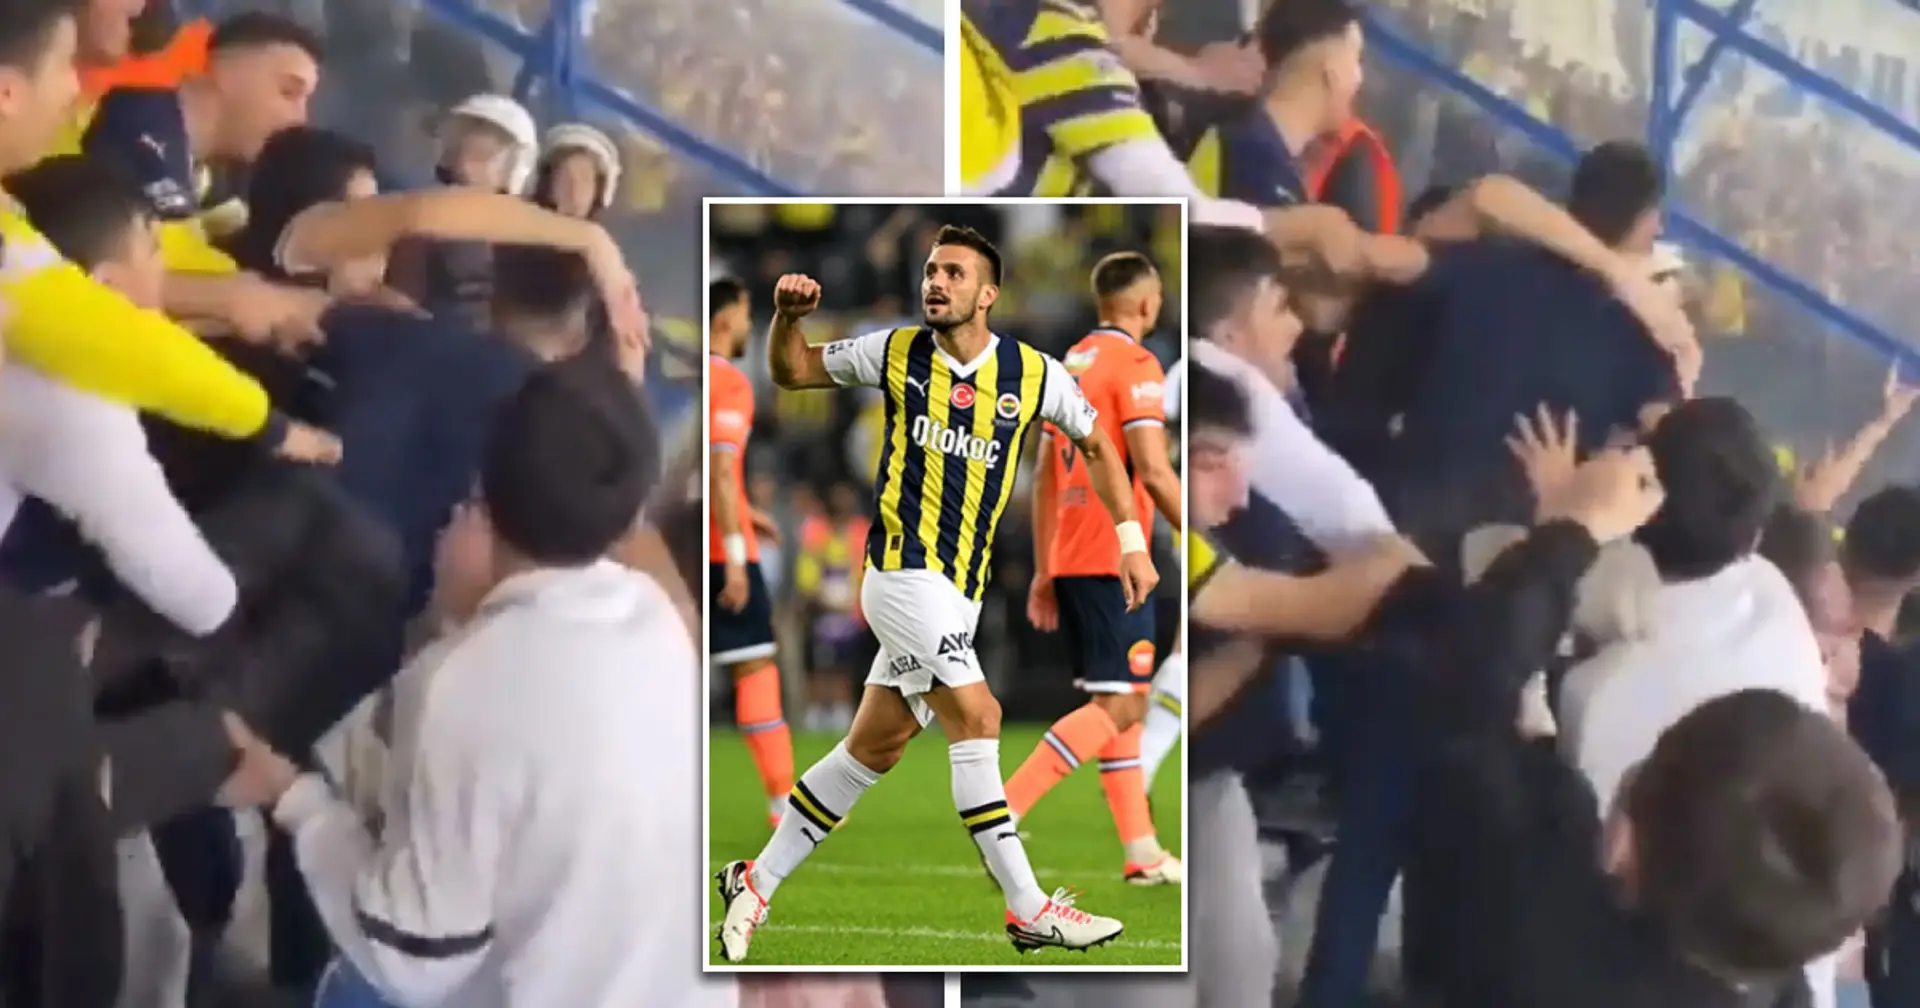 Fenerbahce fans turn themselves into human penis and vagina to taunt rival fans